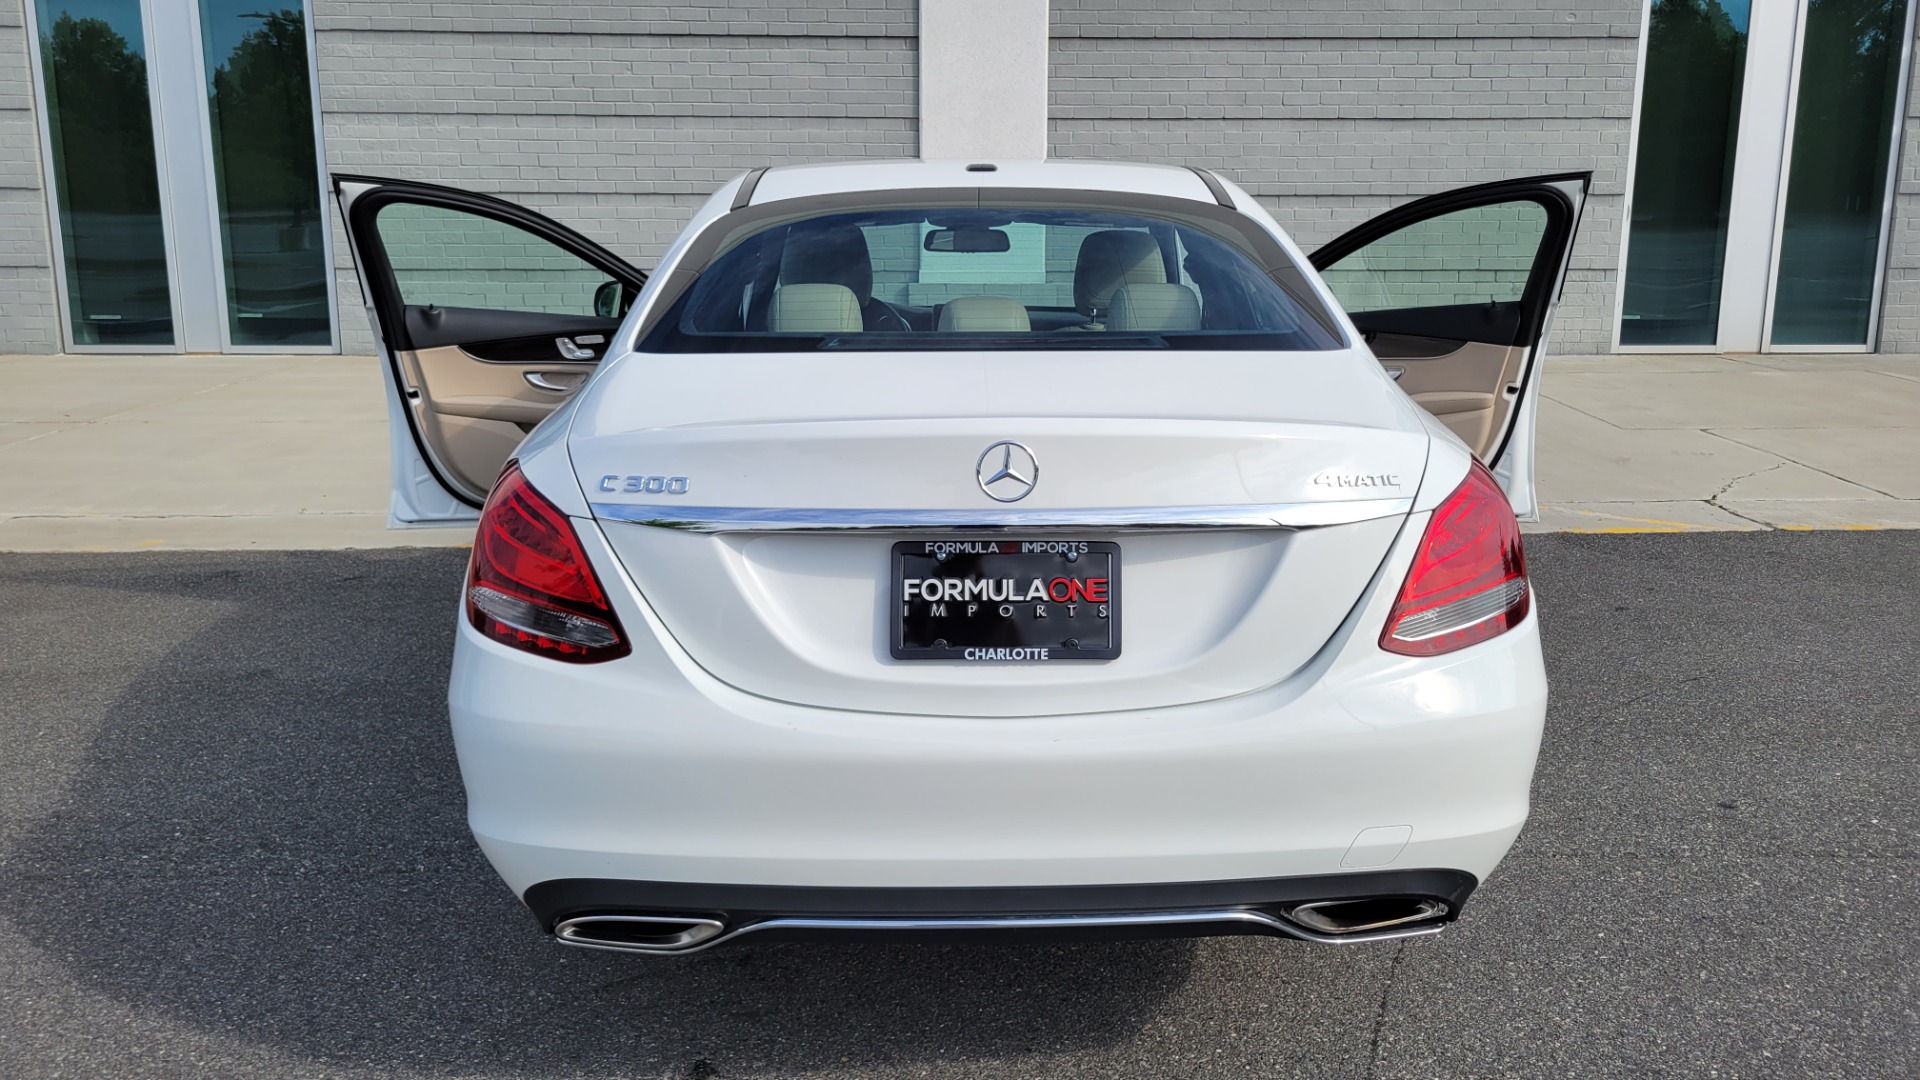 Used 2018 Mercedes-Benz C-CLASS C 300 PREMIUM / SUNROOF / SMARTPHONE / COMFORT SUSP / CAMERA for sale $31,395 at Formula Imports in Charlotte NC 28227 9